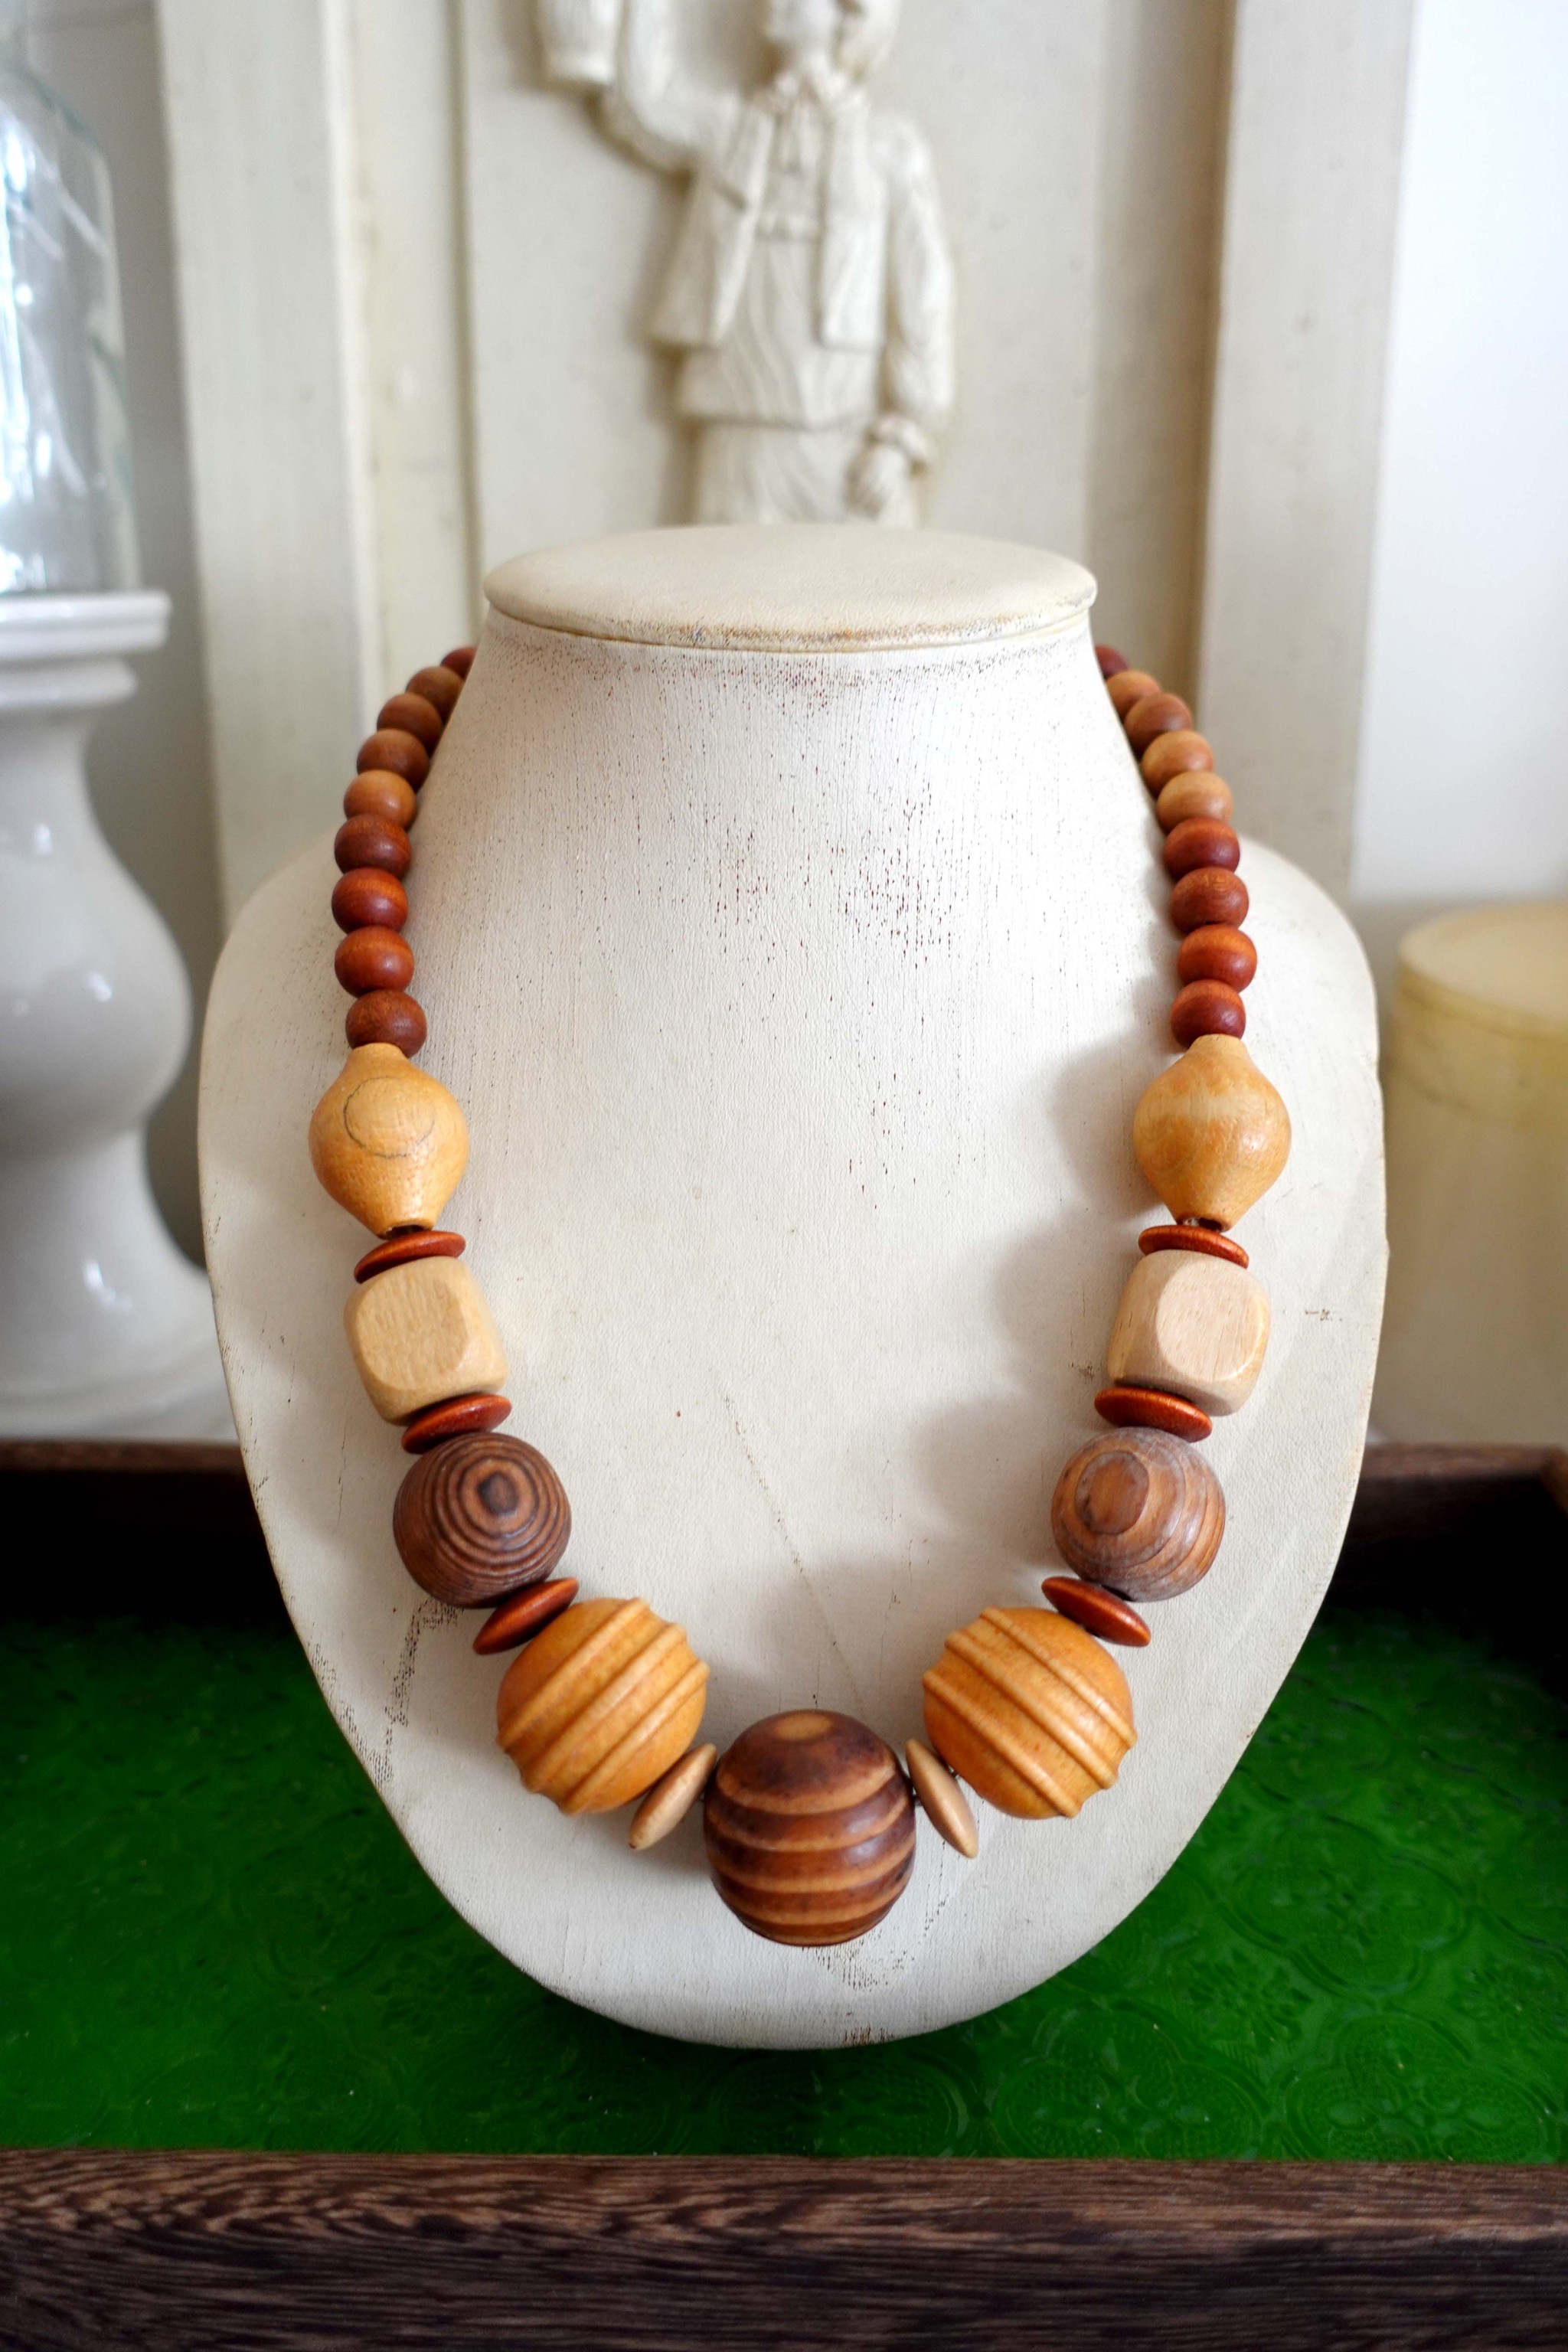 Amazon.com: 81stgeneration Chunky Wooden Beaded Necklaces for Women - Brown  Wood Men's Necklaces - Stretch Cord Long Necklace with Wooden Beads -  Strand Round Ball Bead Necklace: Strand Necklaces: Clothing, Shoes & Jewelry